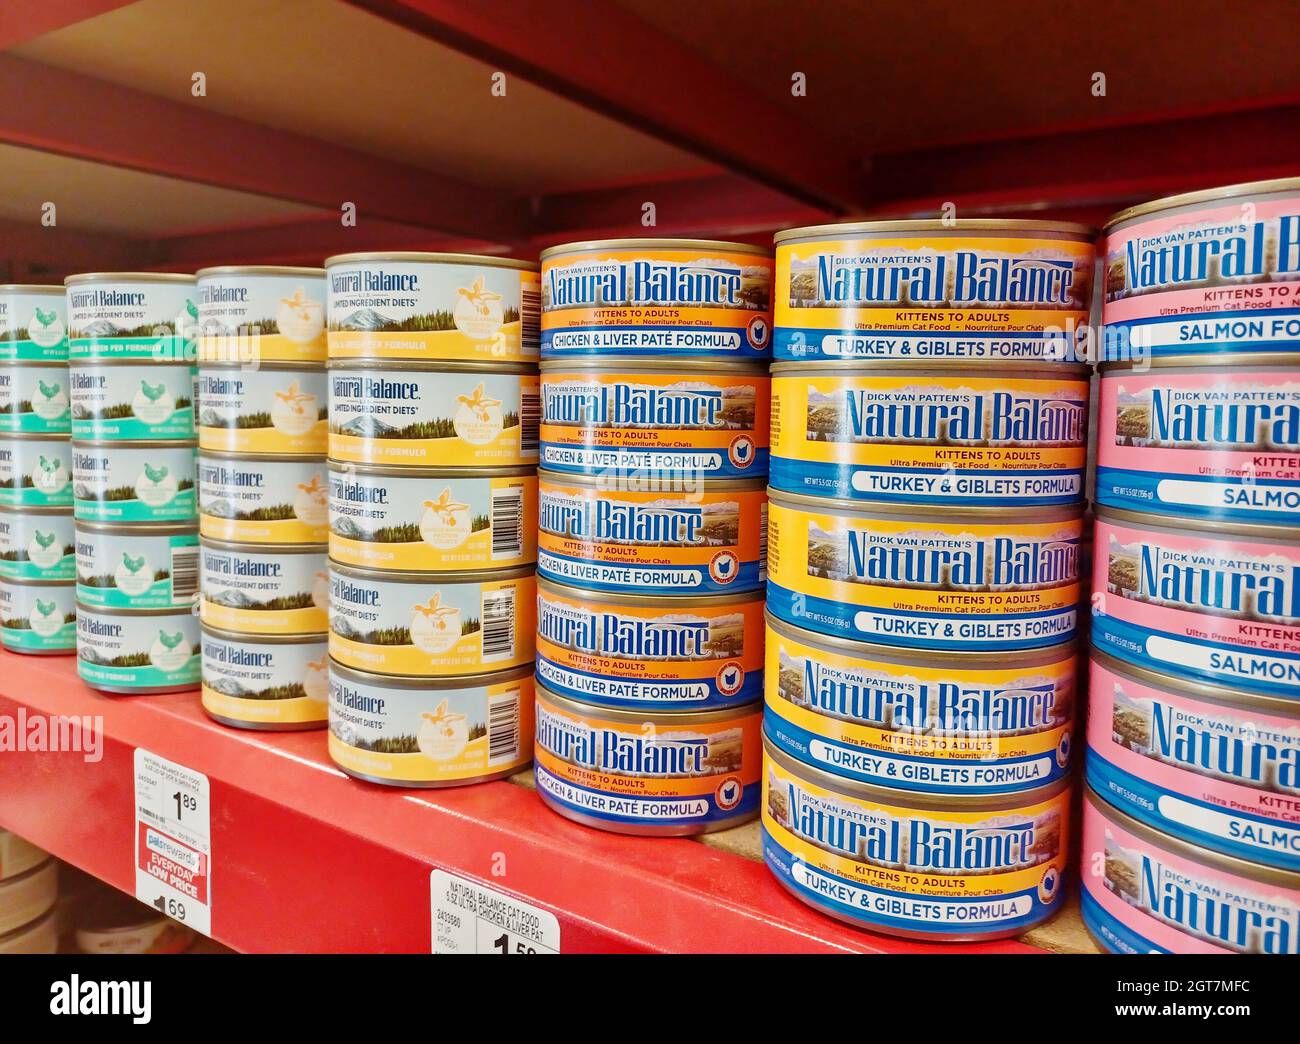 Houston, Texas USA 09-10-2021: Natural Balance brand cat food tins in various flavors stacked up on a market shelf with focus on foreground. Stock Photo